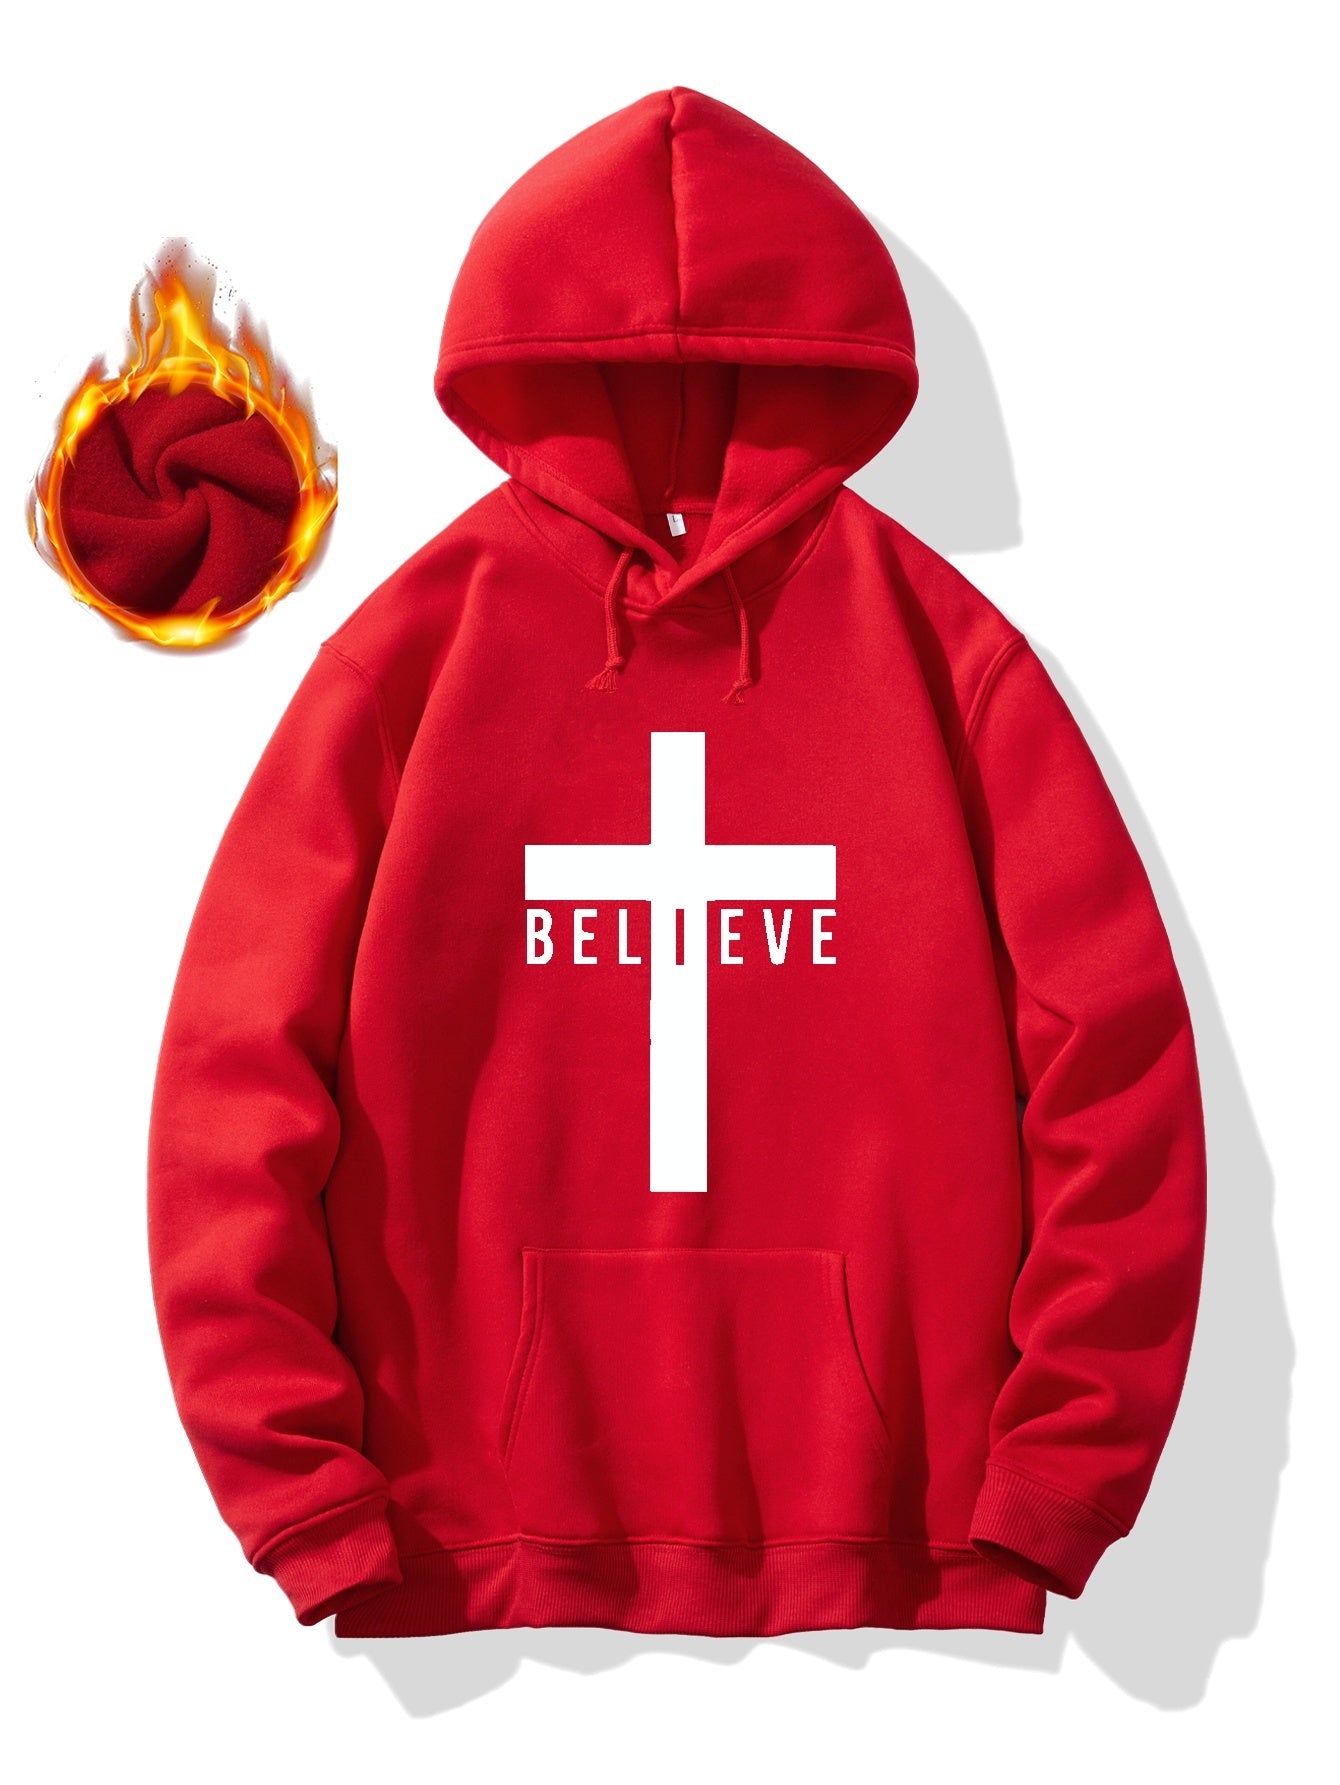 Christian Cross & BELIEVE Print Hoodie, Cool Hoodies For Men, Men's Casual Graphic Design Pullover Hooded Sweatshirt With Kangaroo Pocket Streetwear For Winter Fall, As Gifts